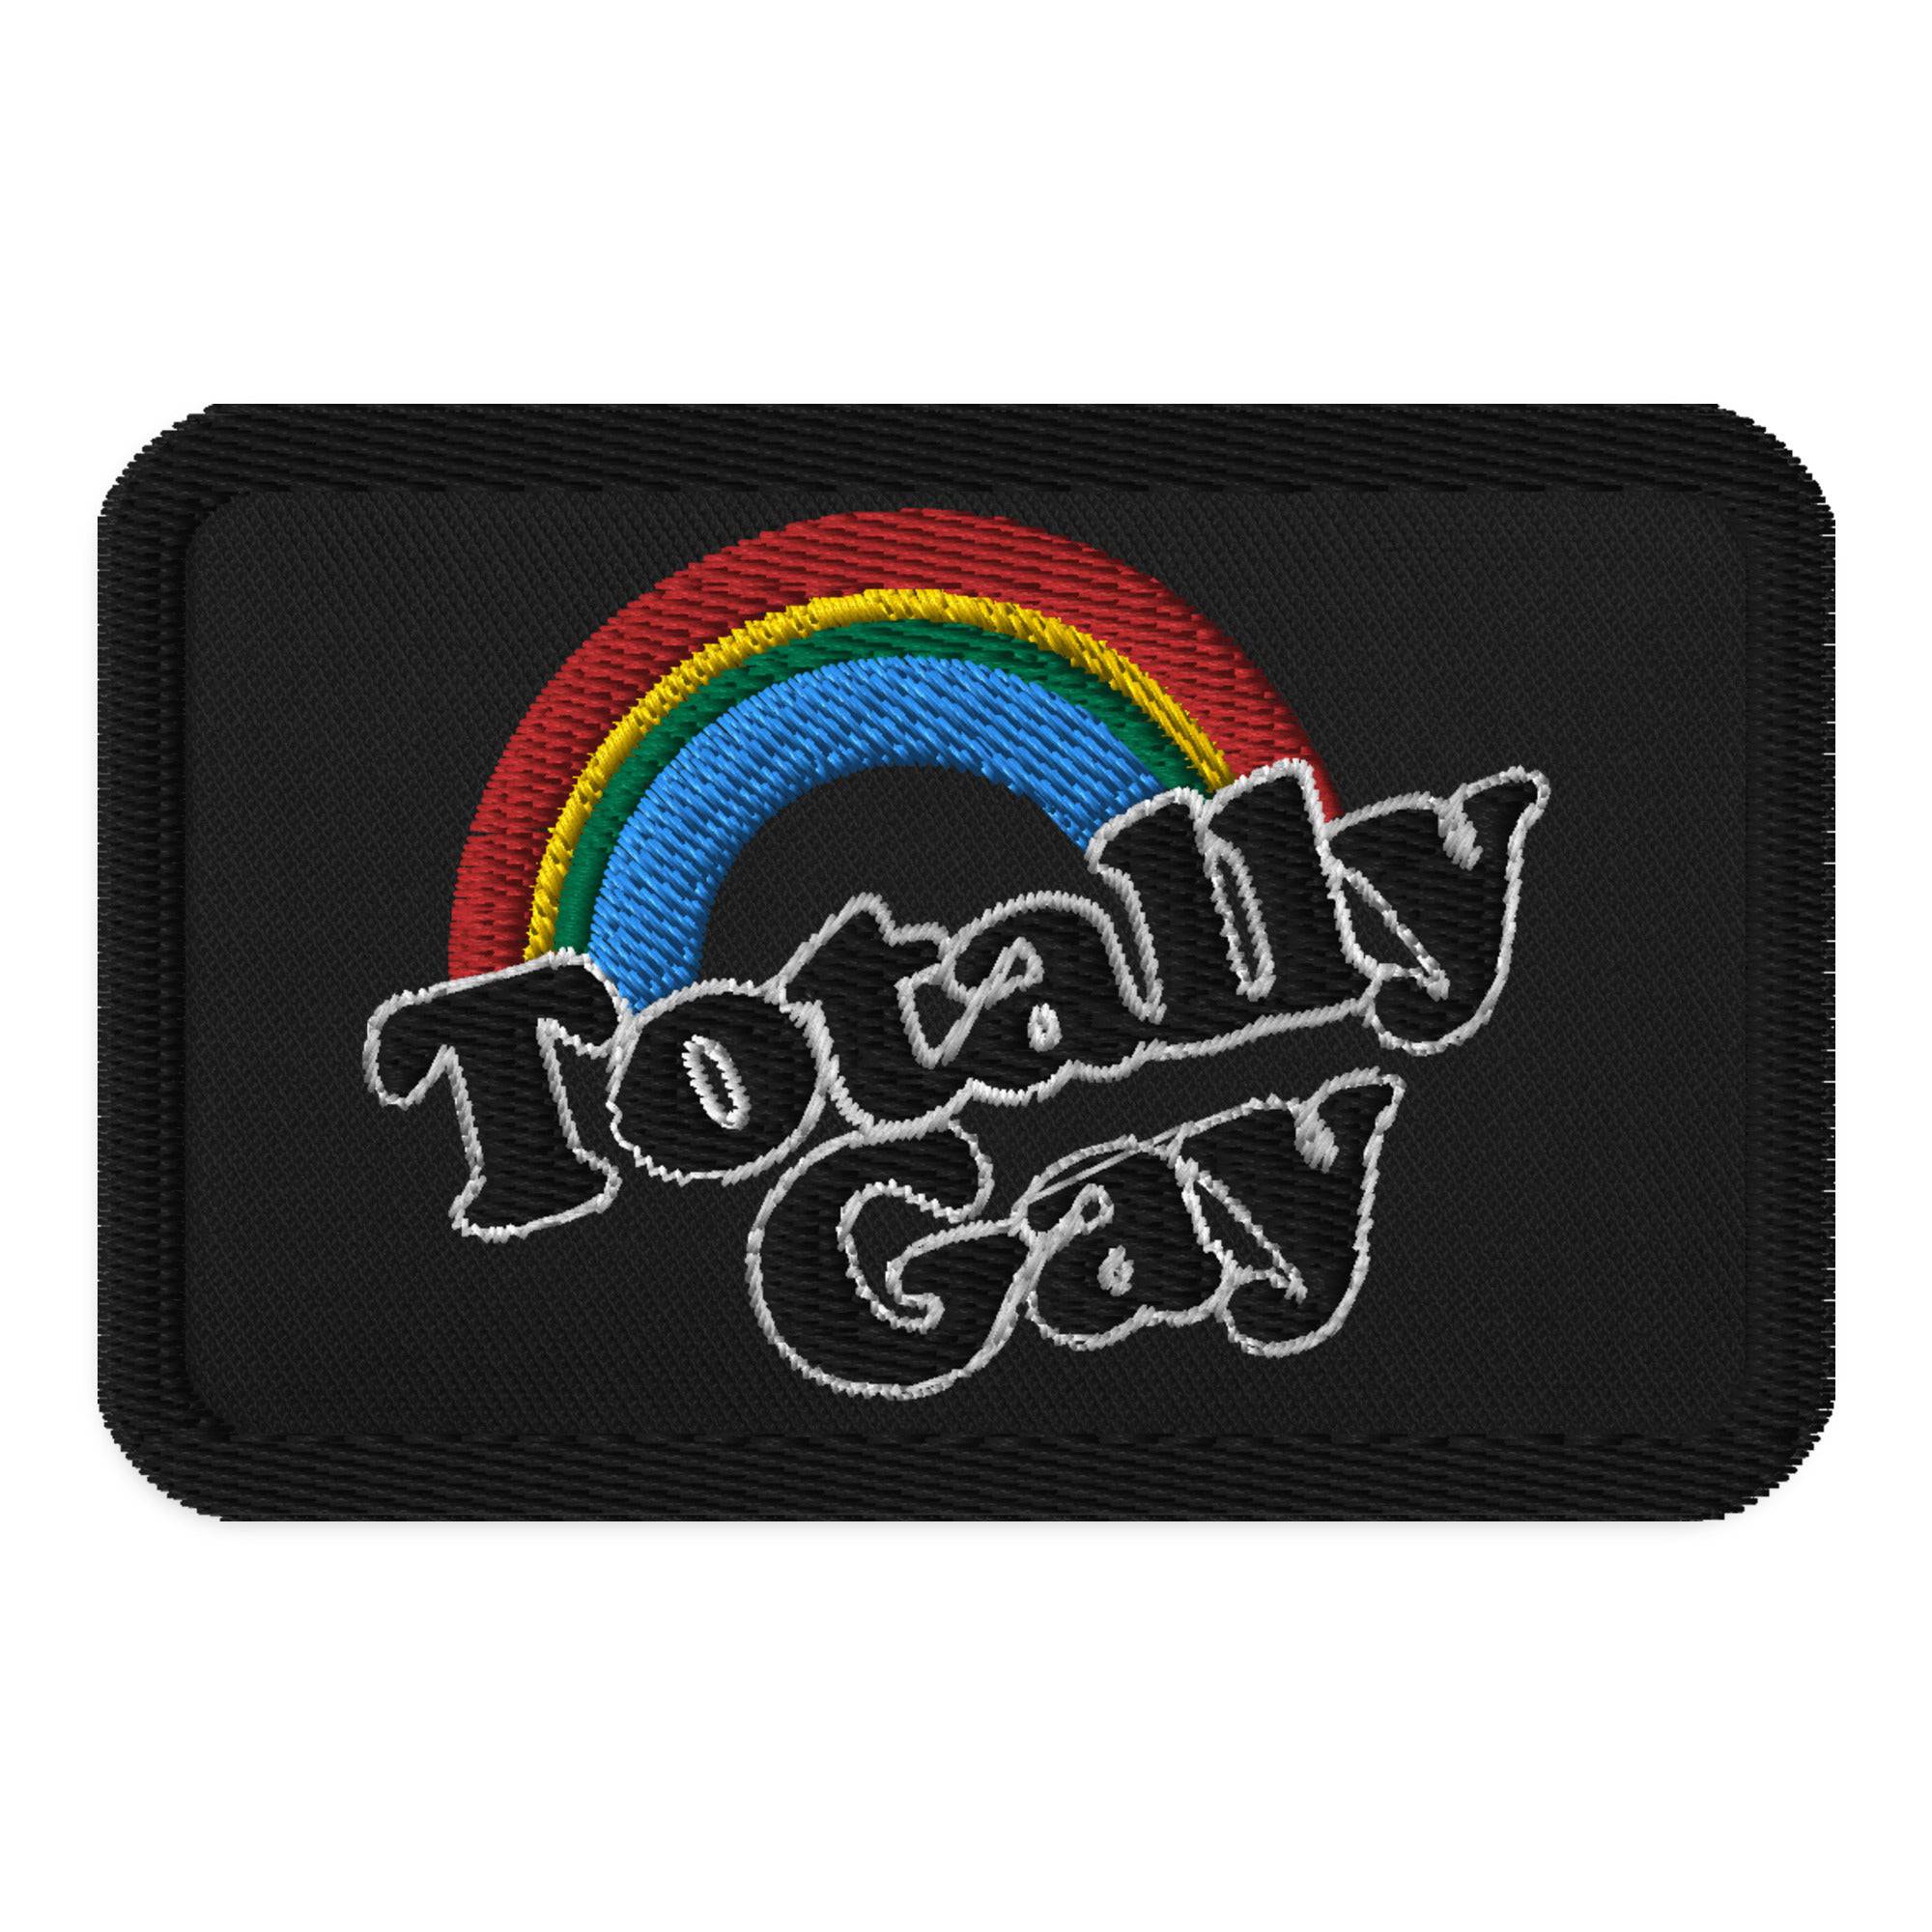 Totally Gay Embroidered patches